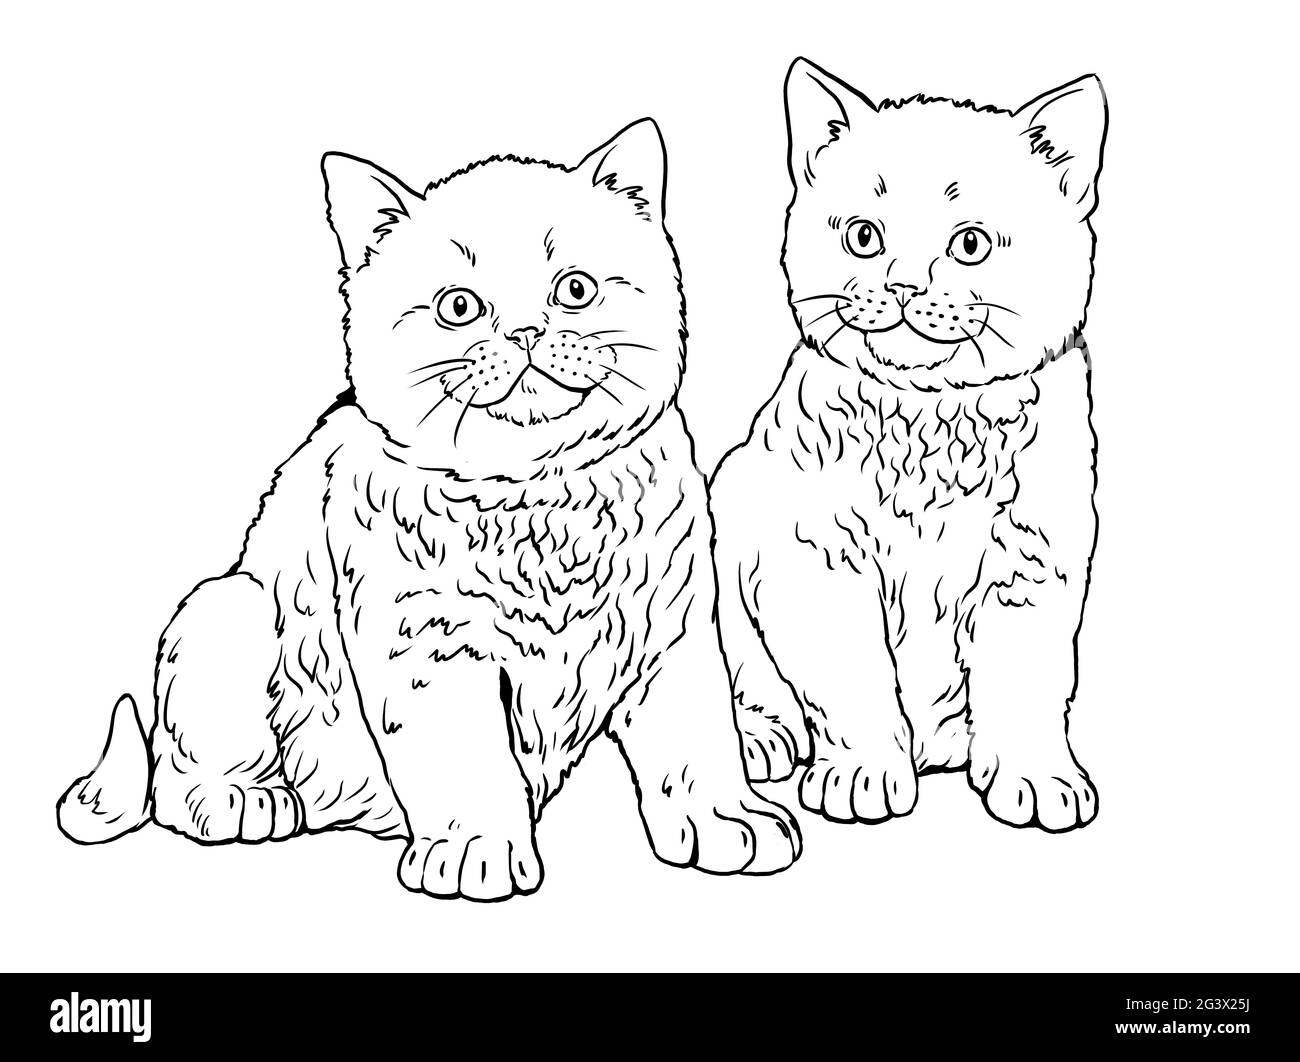 Cute kittens for coloring. Template for a coloring book with little cats. Stock Photo